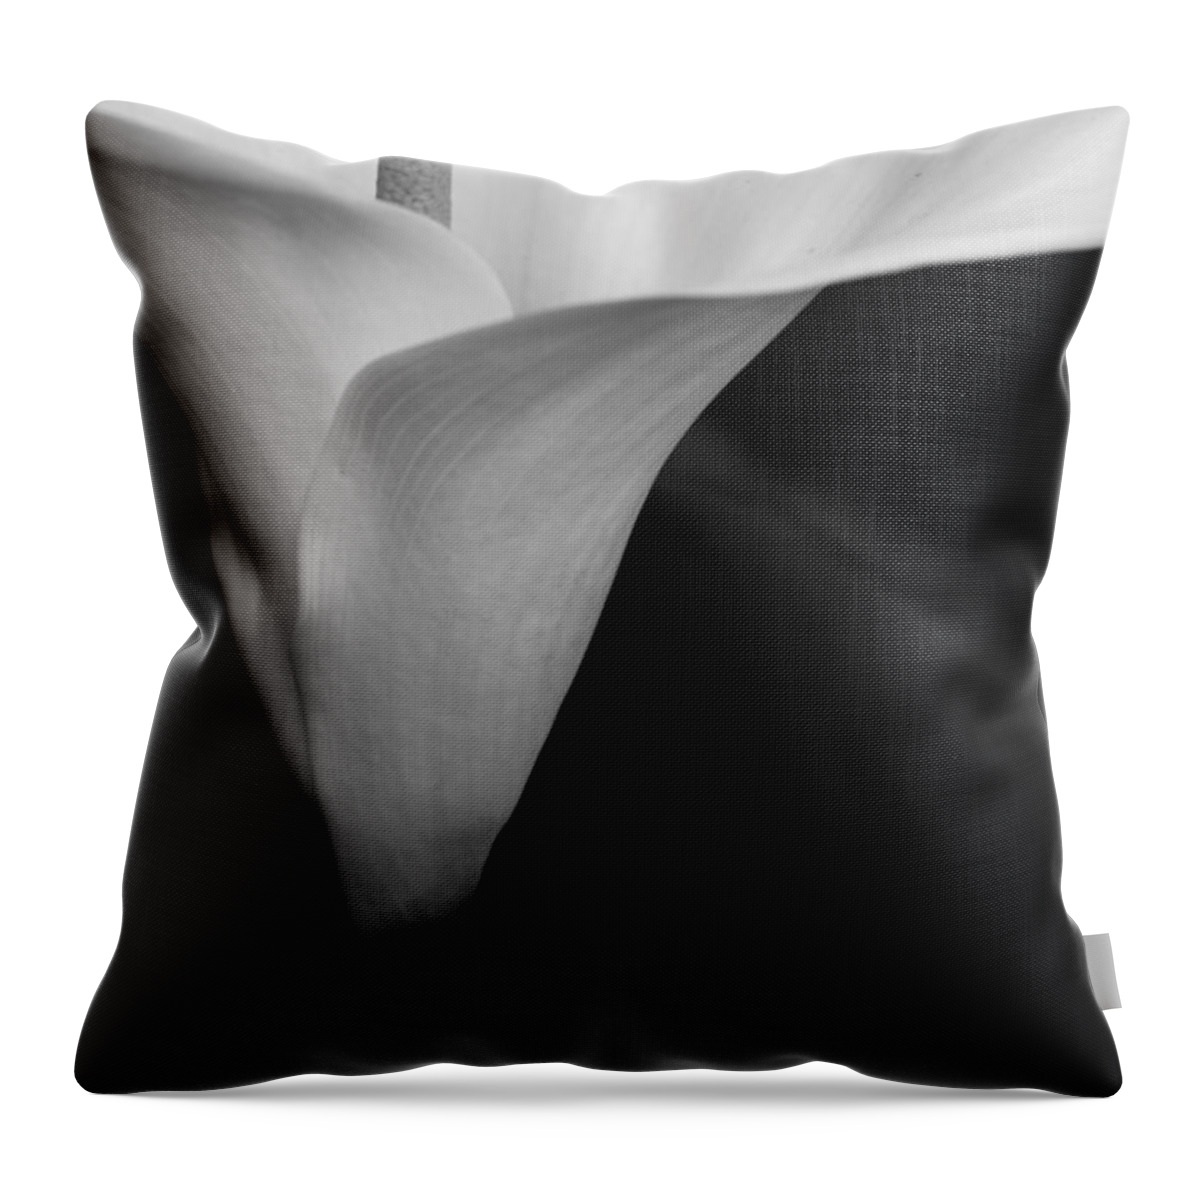 Landscapes Throw Pillow featuring the photograph Calla Lily Corner by John F Tsumas